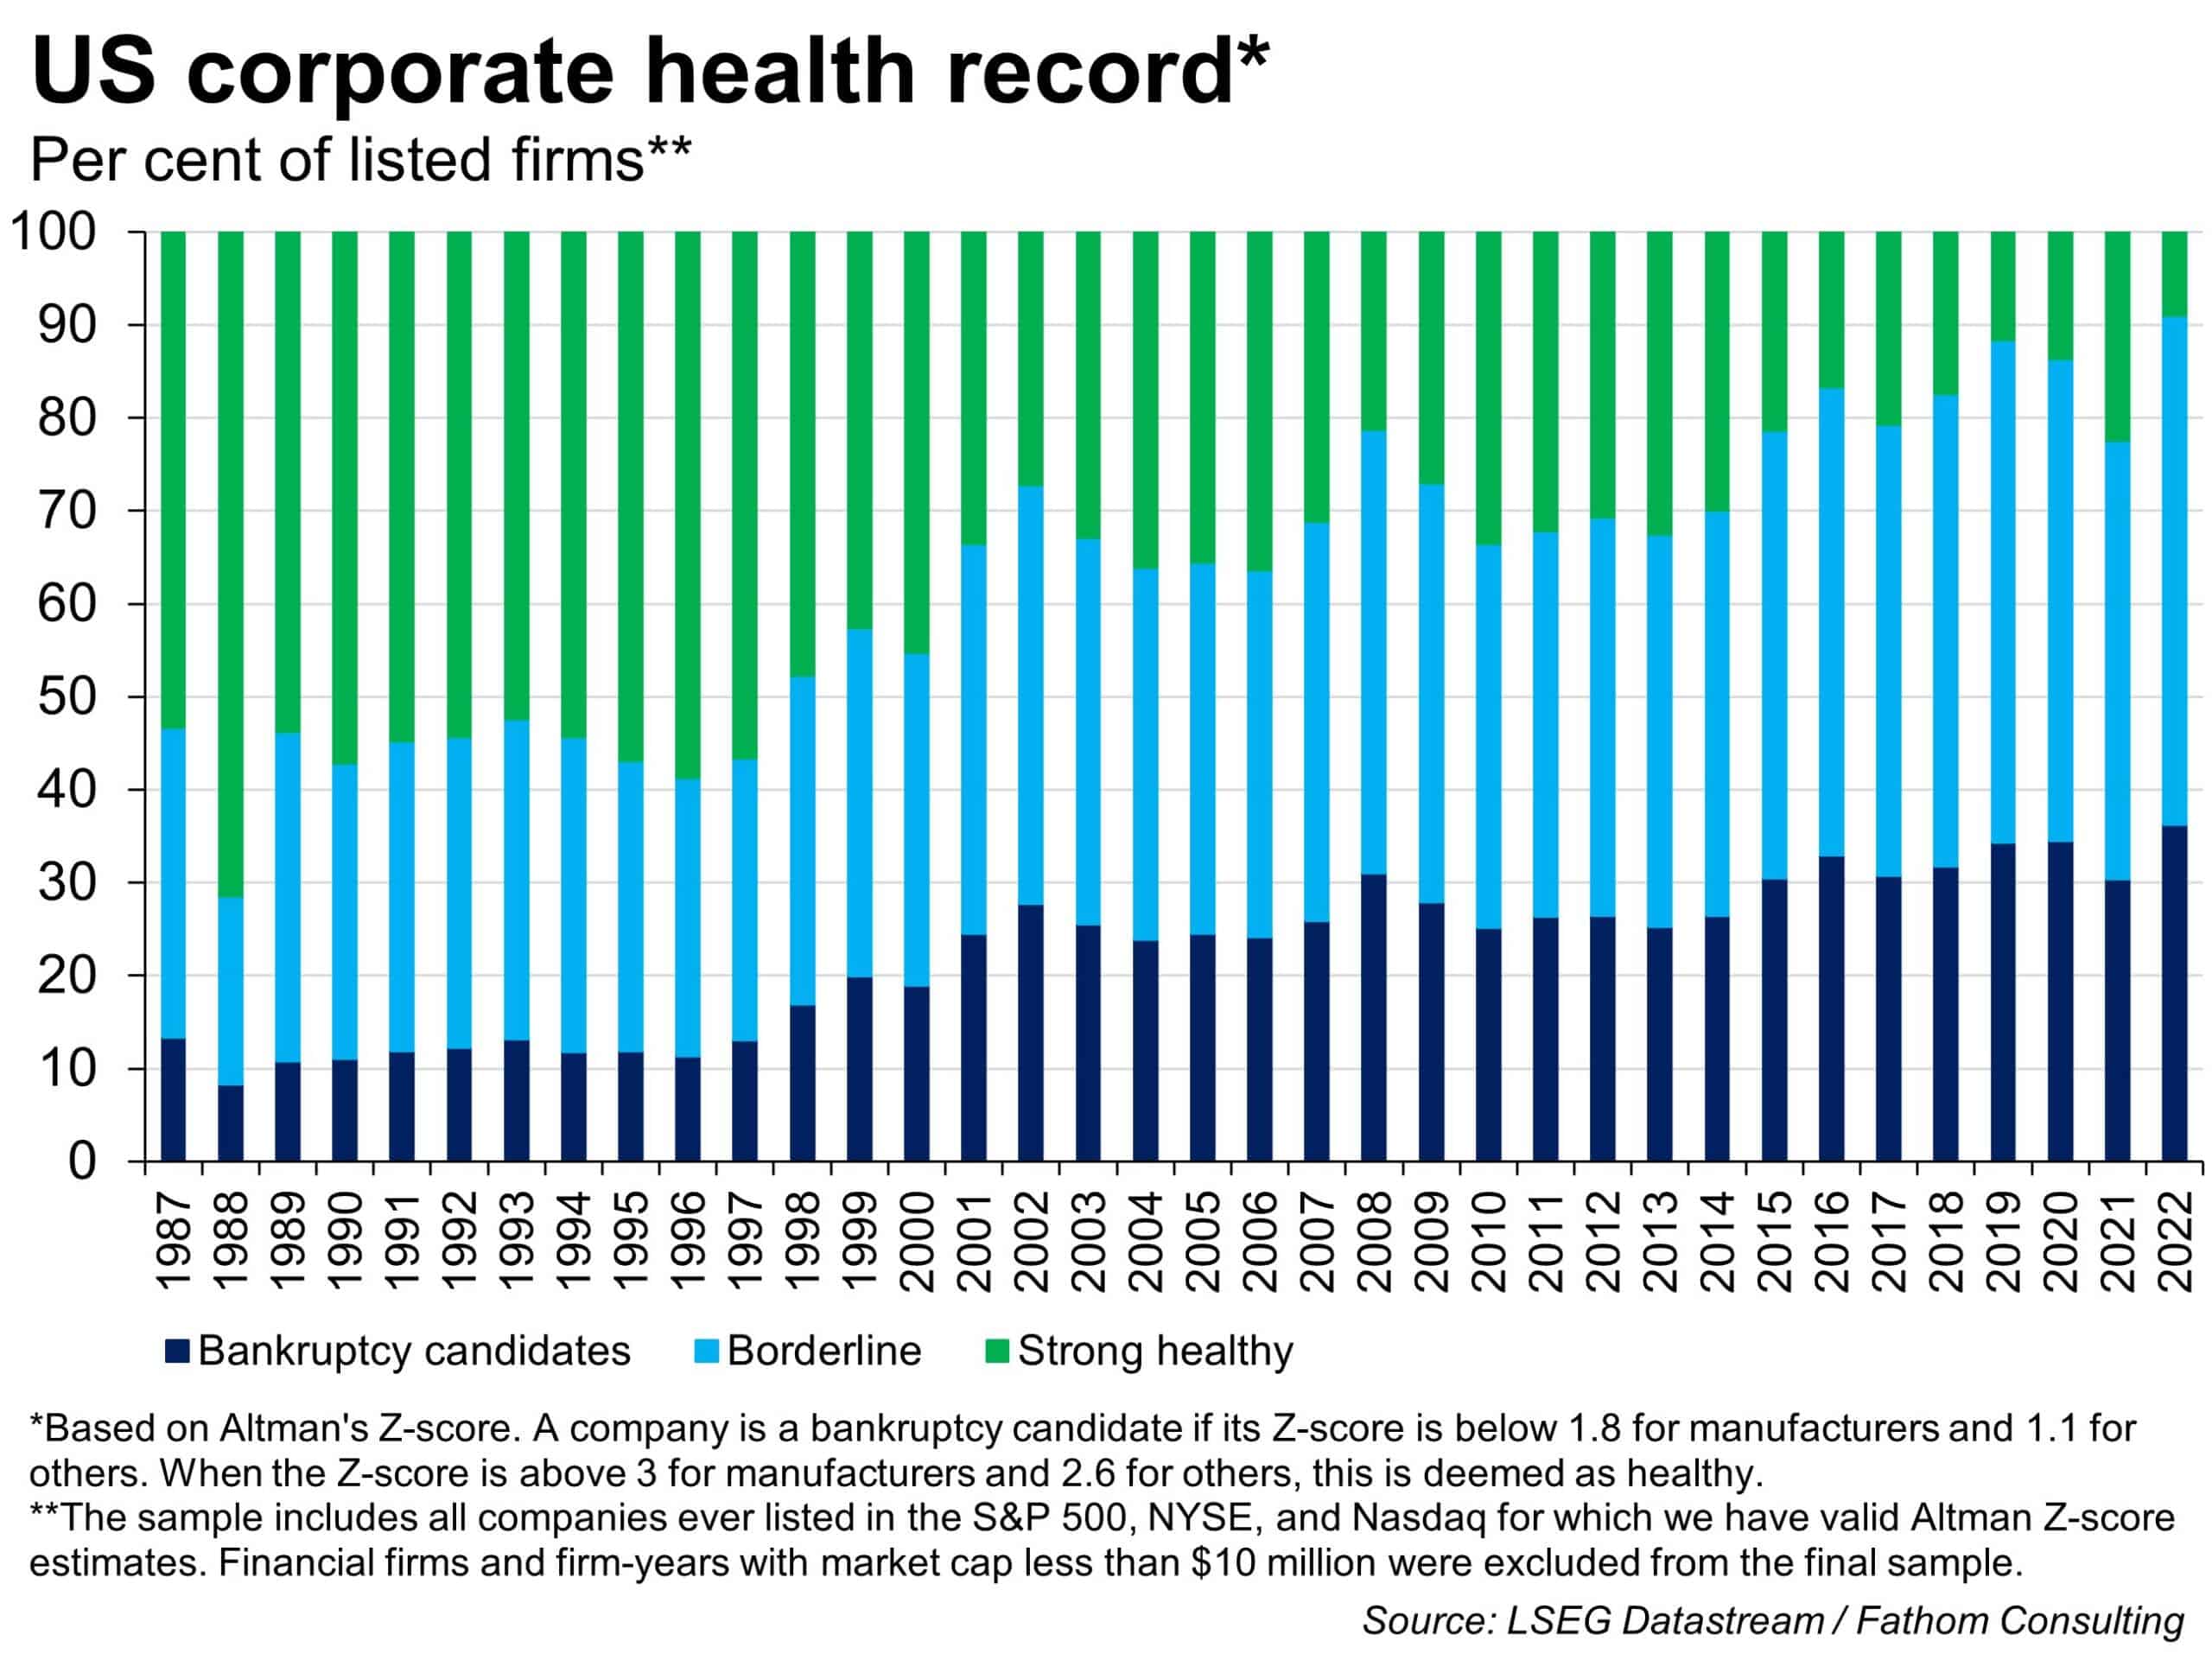 US corporate health record, based on Altman's Z-score, by per cent of listed firms, from 1987-2022